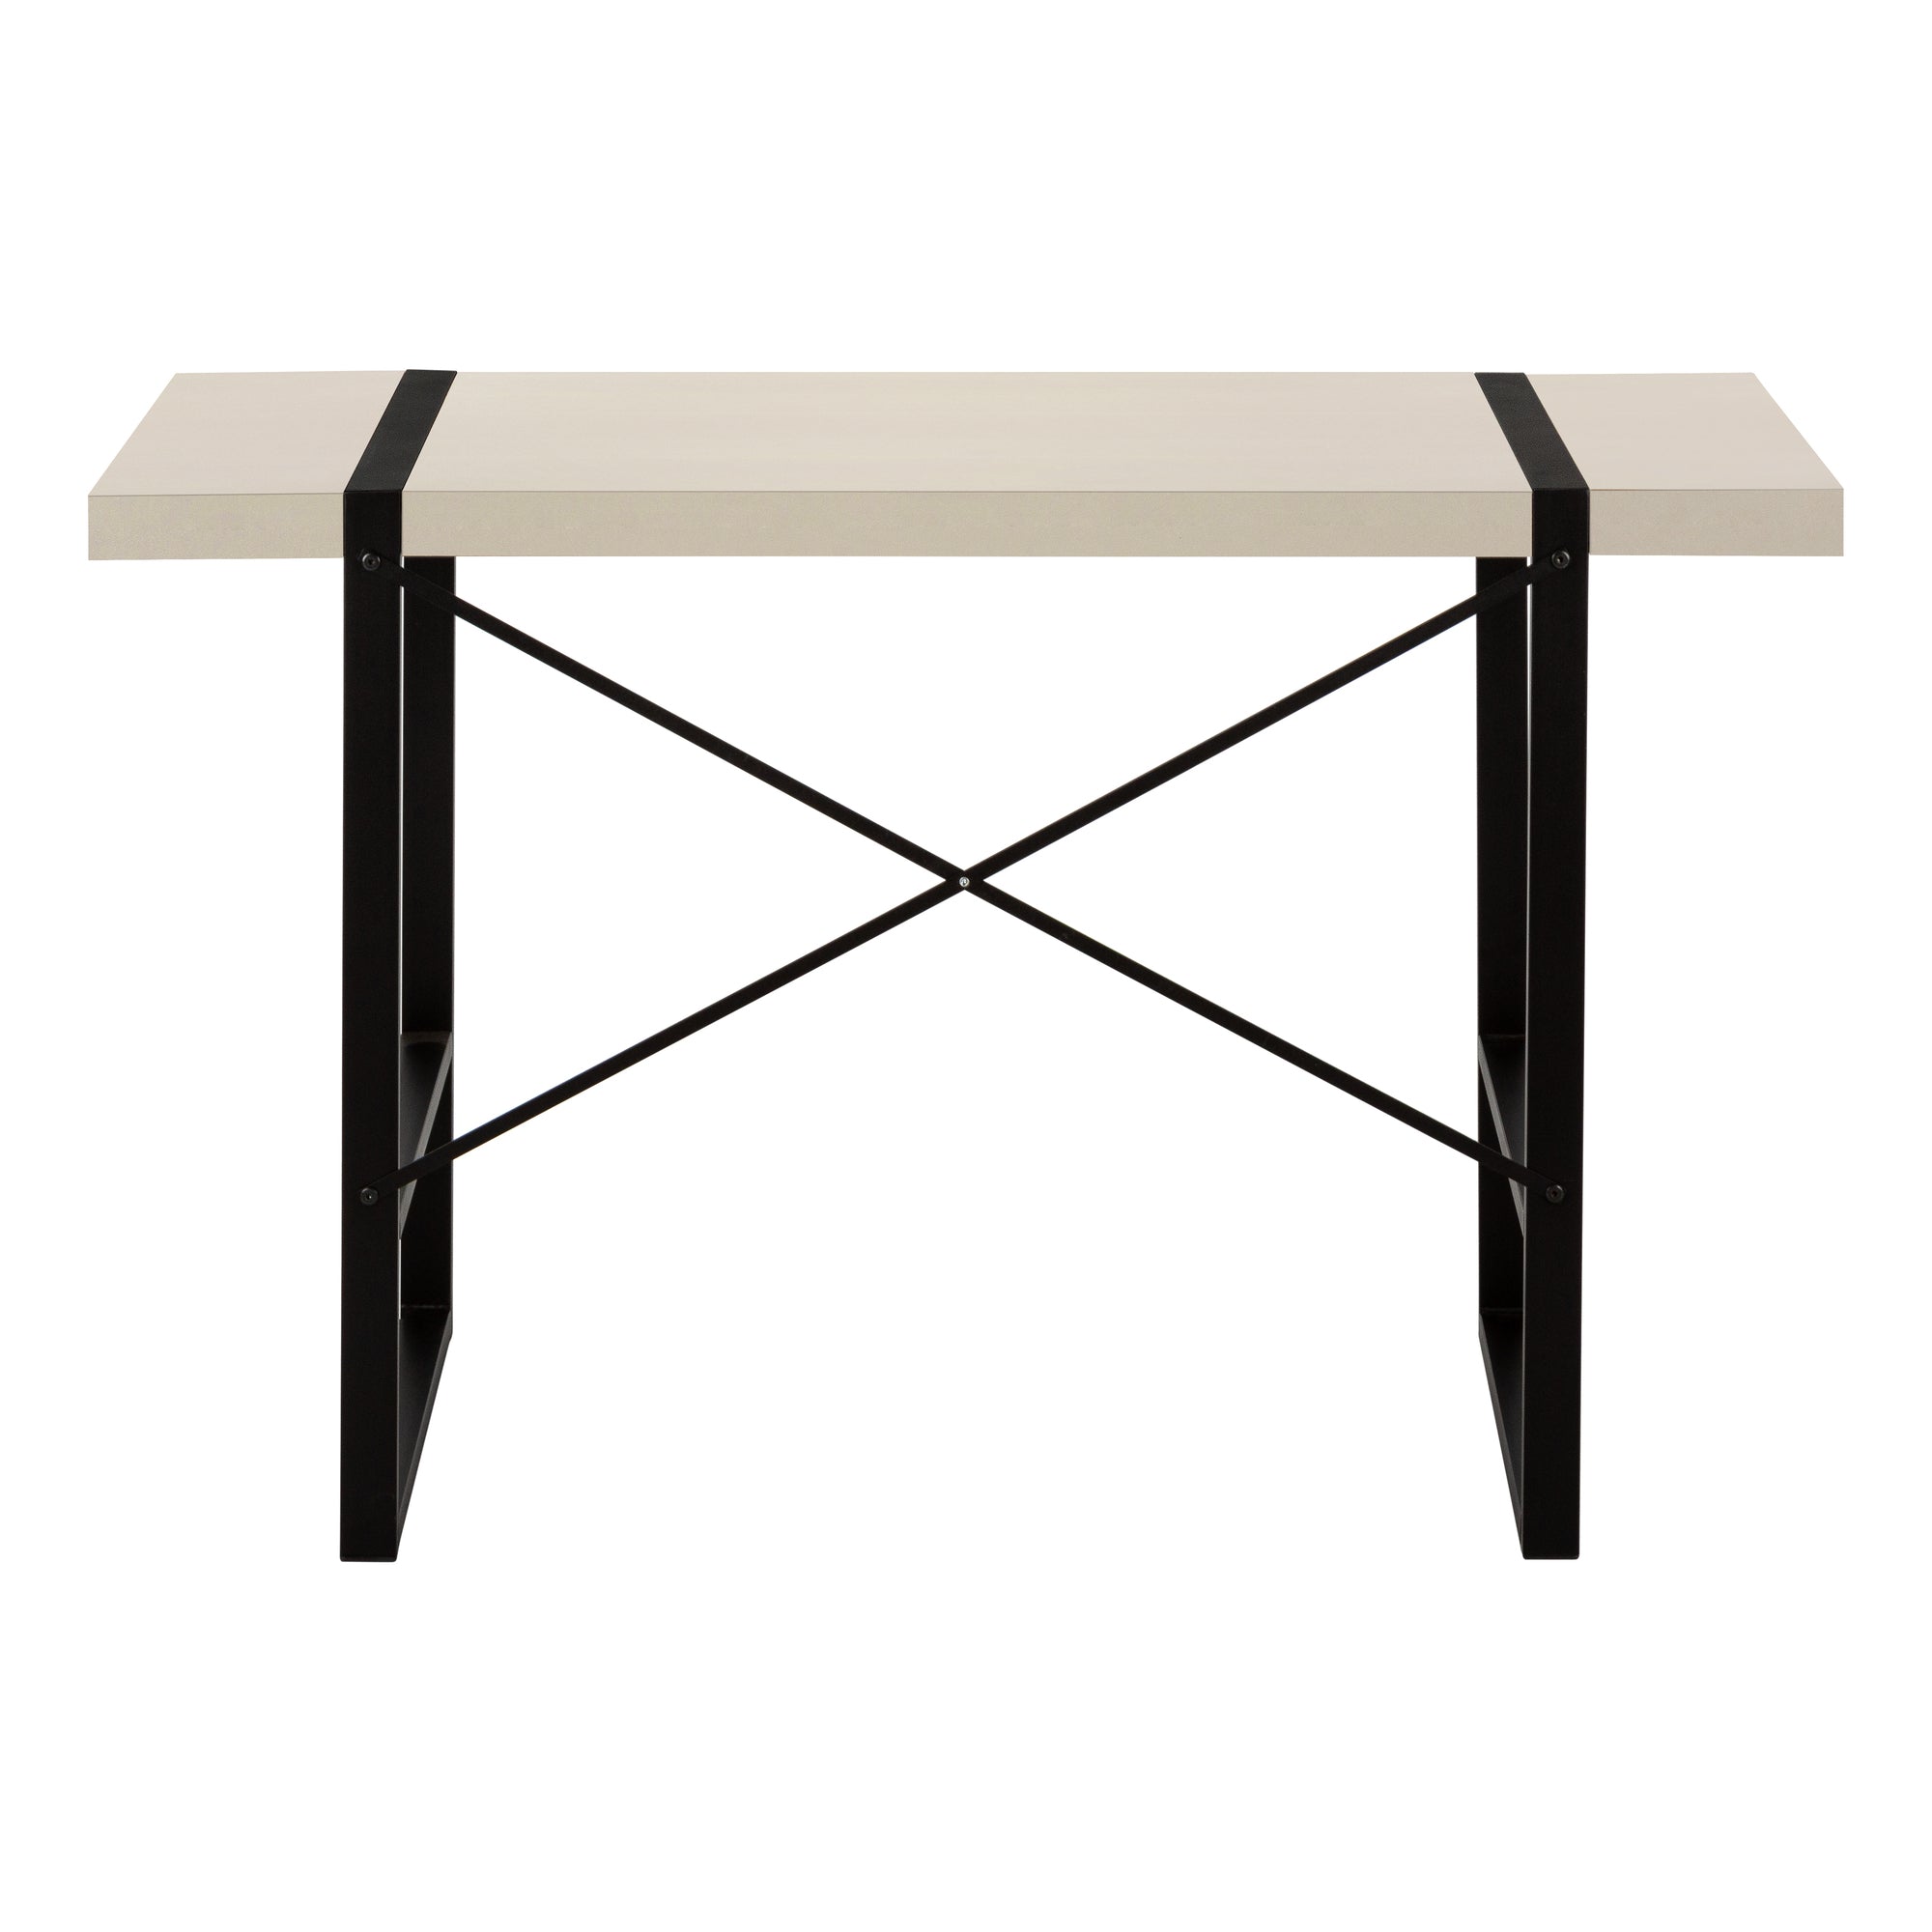 MN-607659    Computer Desk, Home Office, Laptop, 48"L, Metal, Laminate, Taupe, Black, Contemporary, Modern